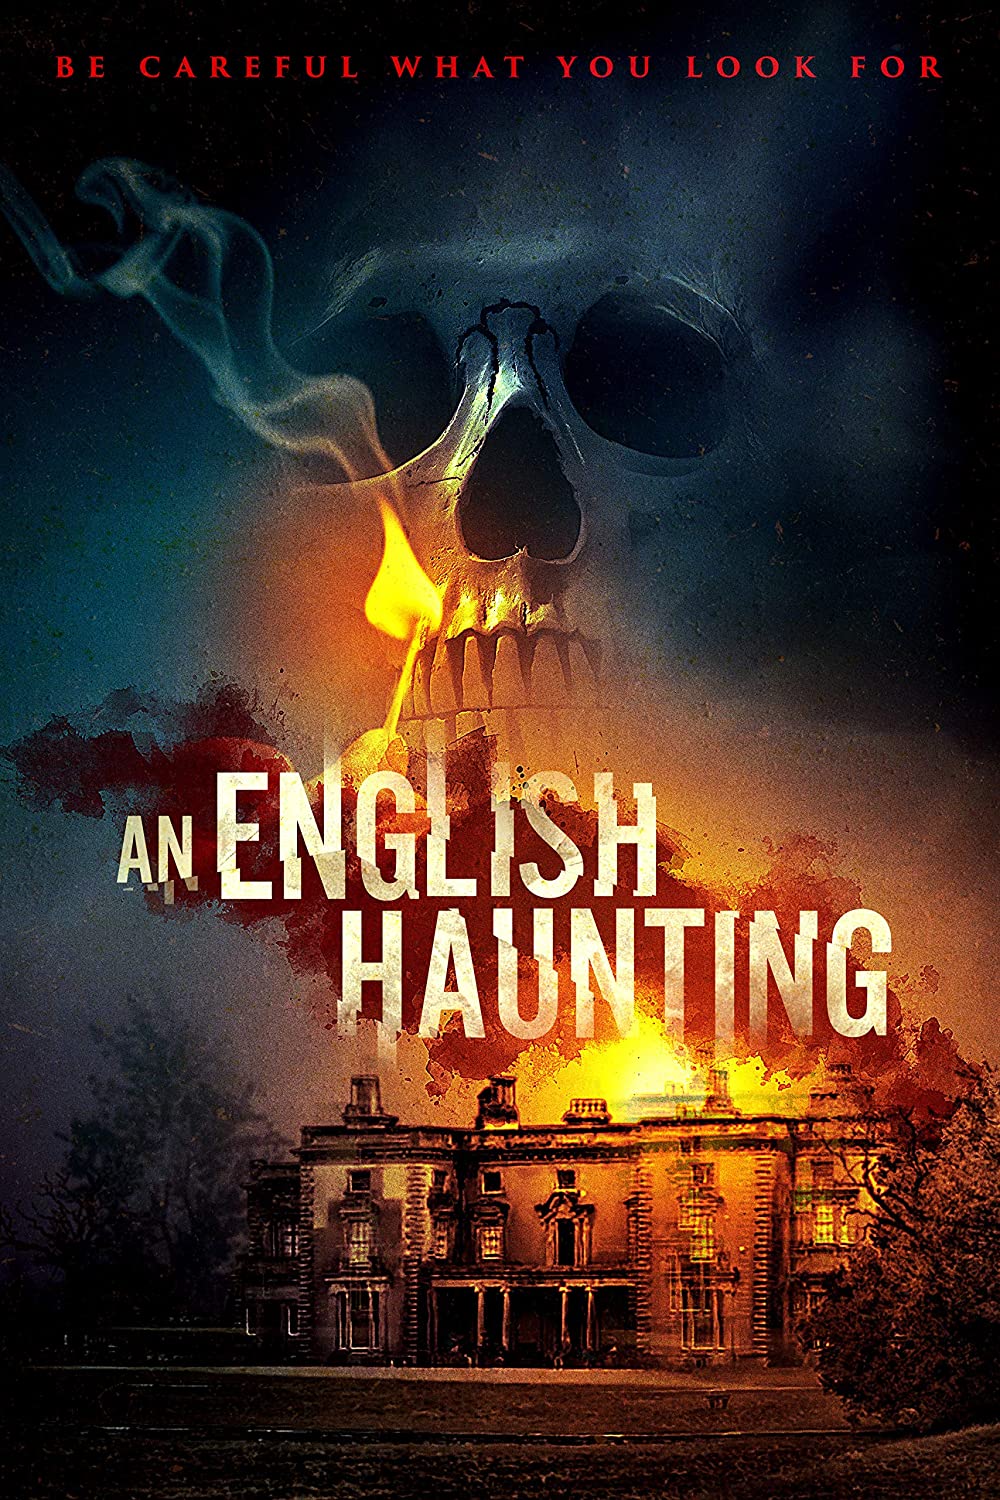 A English Haunting poster